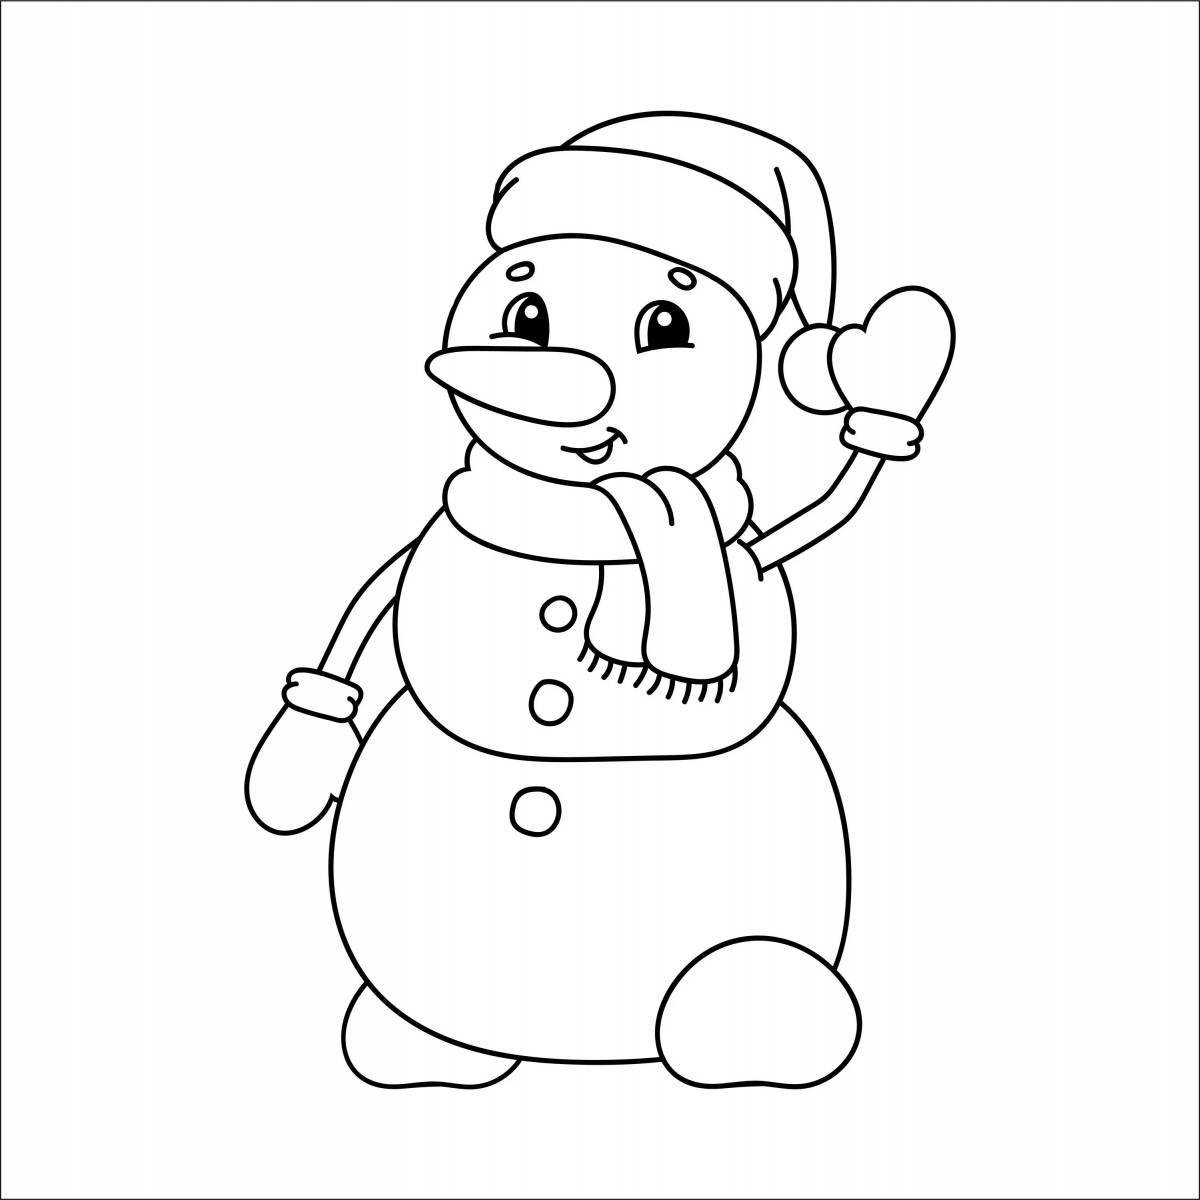 Magic snowman coloring book for kids 2 3